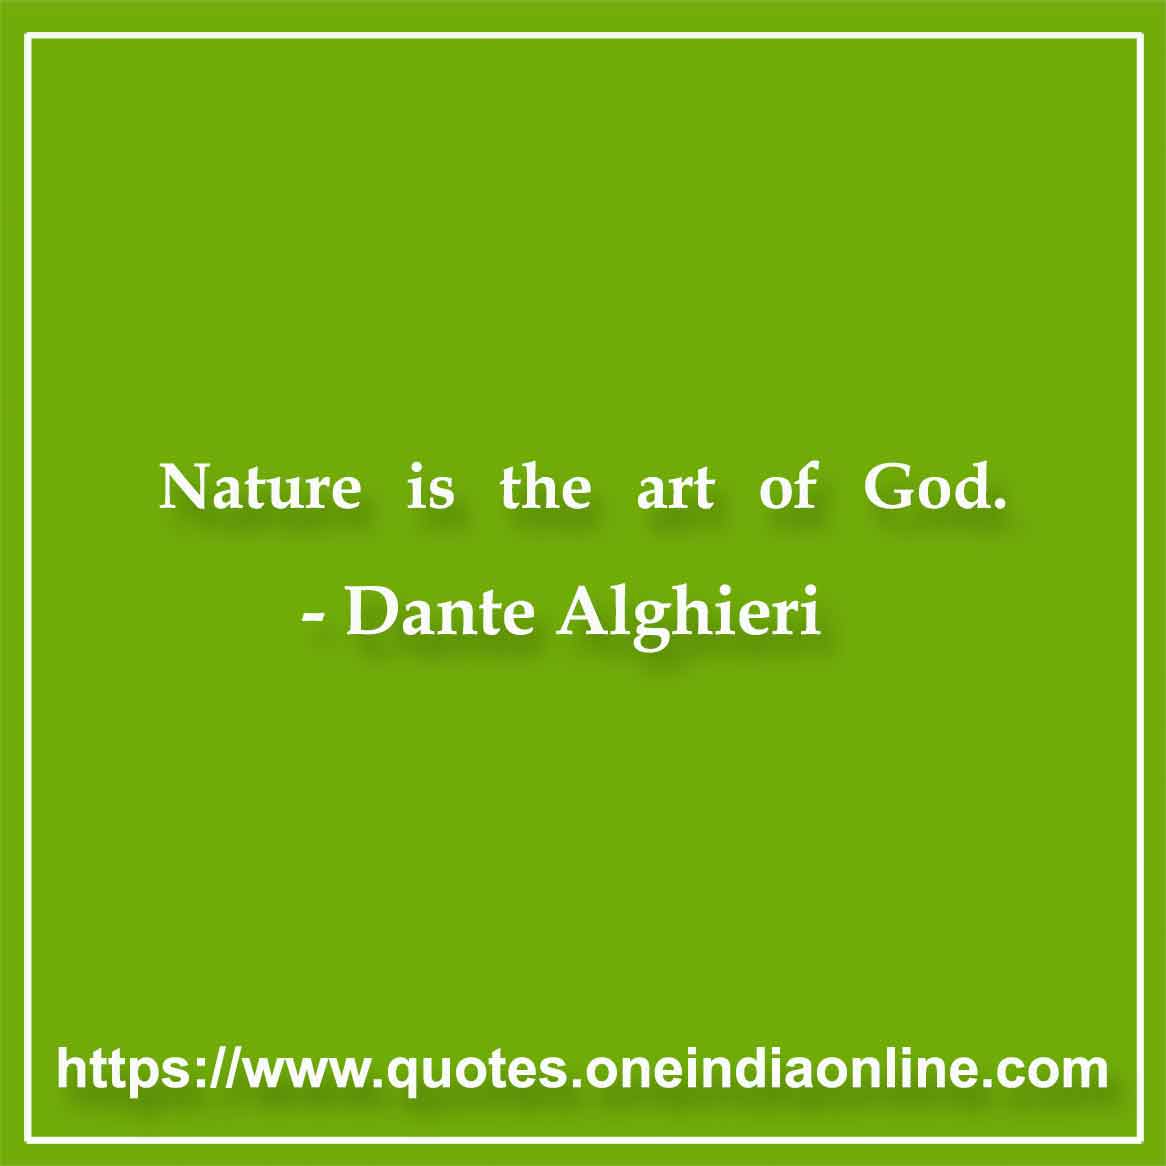 Nature is the art of God.

- Best  by Dante Alghieri